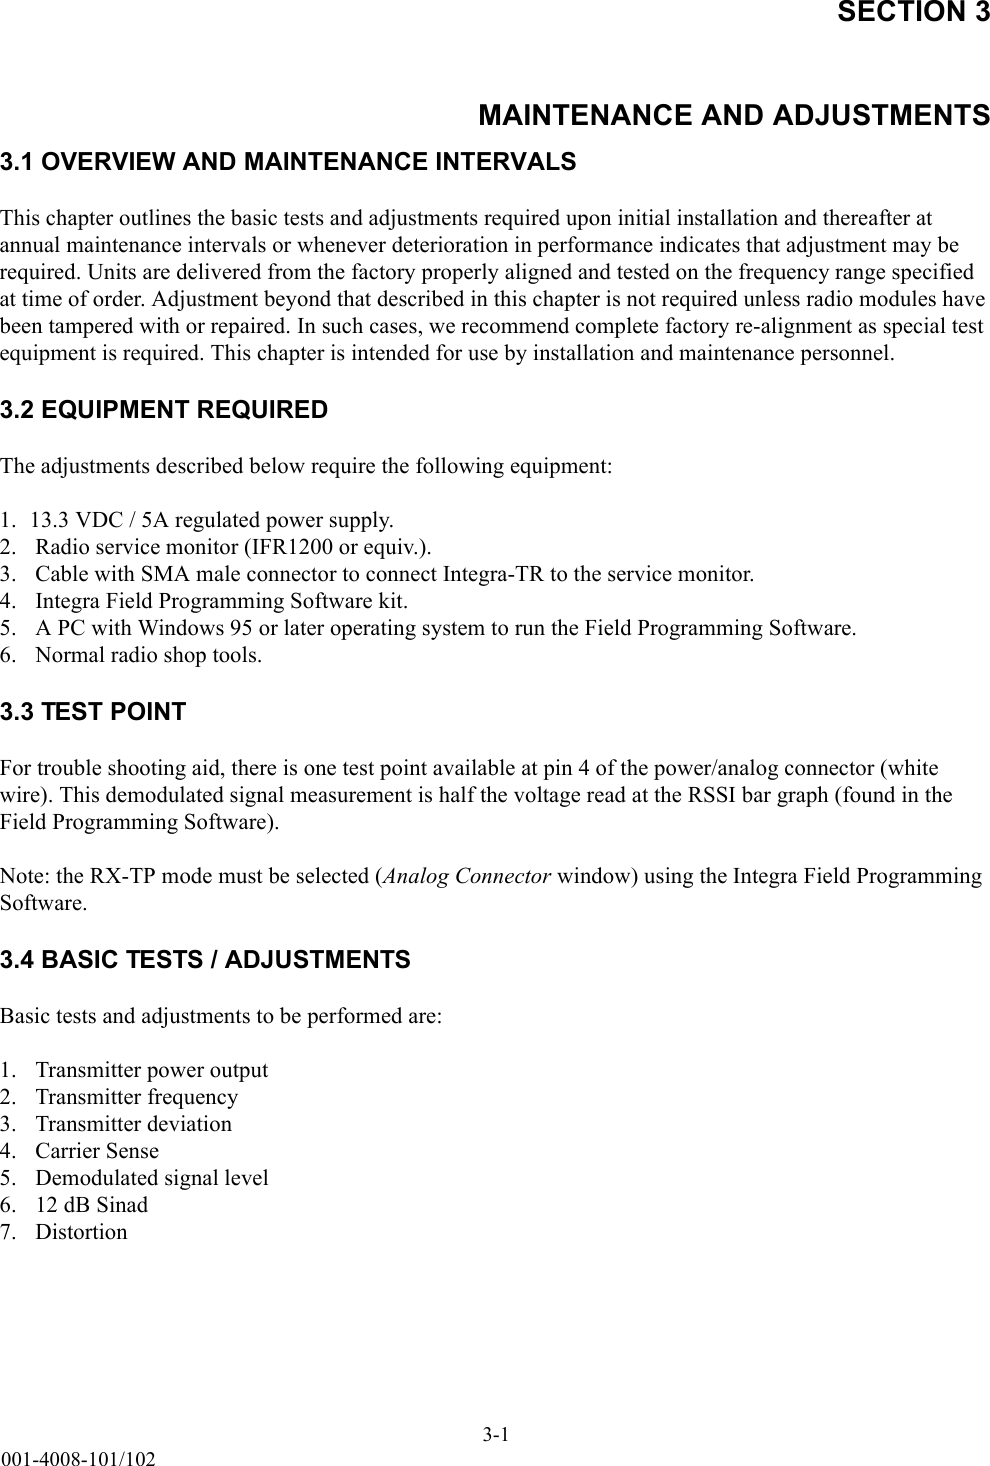 SECTION 3MAINTENANCE AND ADJUSTMENTS3-1001-4008-101/1023.1 OVERVIEW AND MAINTENANCE INTERVALSThis chapter outlines the basic tests and adjustments required upon initial installation and thereafter at annual maintenance intervals or whenever deterioration in performance indicates that adjustment may be required. Units are delivered from the factory properly aligned and tested on the frequency range specified at time of order. Adjustment beyond that described in this chapter is not required unless radio modules have been tampered with or repaired. In such cases, we recommend complete factory re-alignment as special test equipment is required. This chapter is intended for use by installation and maintenance personnel.3.2 EQUIPMENT REQUIREDThe adjustments described below require the following equipment:1. 13.3 VDC / 5A regulated power supply.2.  Radio service monitor (IFR1200 or equiv.).3.  Cable with SMA male connector to connect Integra-TR to the service monitor.4.  Integra Field Programming Software kit.5.  A PC with Windows 95 or later operating system to run the Field Programming Software.6.  Normal radio shop tools.3.3 TEST POINTFor trouble shooting aid, there is one test point available at pin 4 of the power/analog connector (white wire). This demodulated signal measurement is half the voltage read at the RSSI bar graph (found in the Field Programming Software).Note: the RX-TP mode must be selected (Analog Connector window) using the Integra Field Programming Software.3.4 BASIC TESTS / ADJUSTMENTS Basic tests and adjustments to be performed are:1.  Transmitter power output2.  Transmitter frequency3.  Transmitter deviation4.  Carrier Sense5.  Demodulated signal level6.  12 dB Sinad7.  Distortion